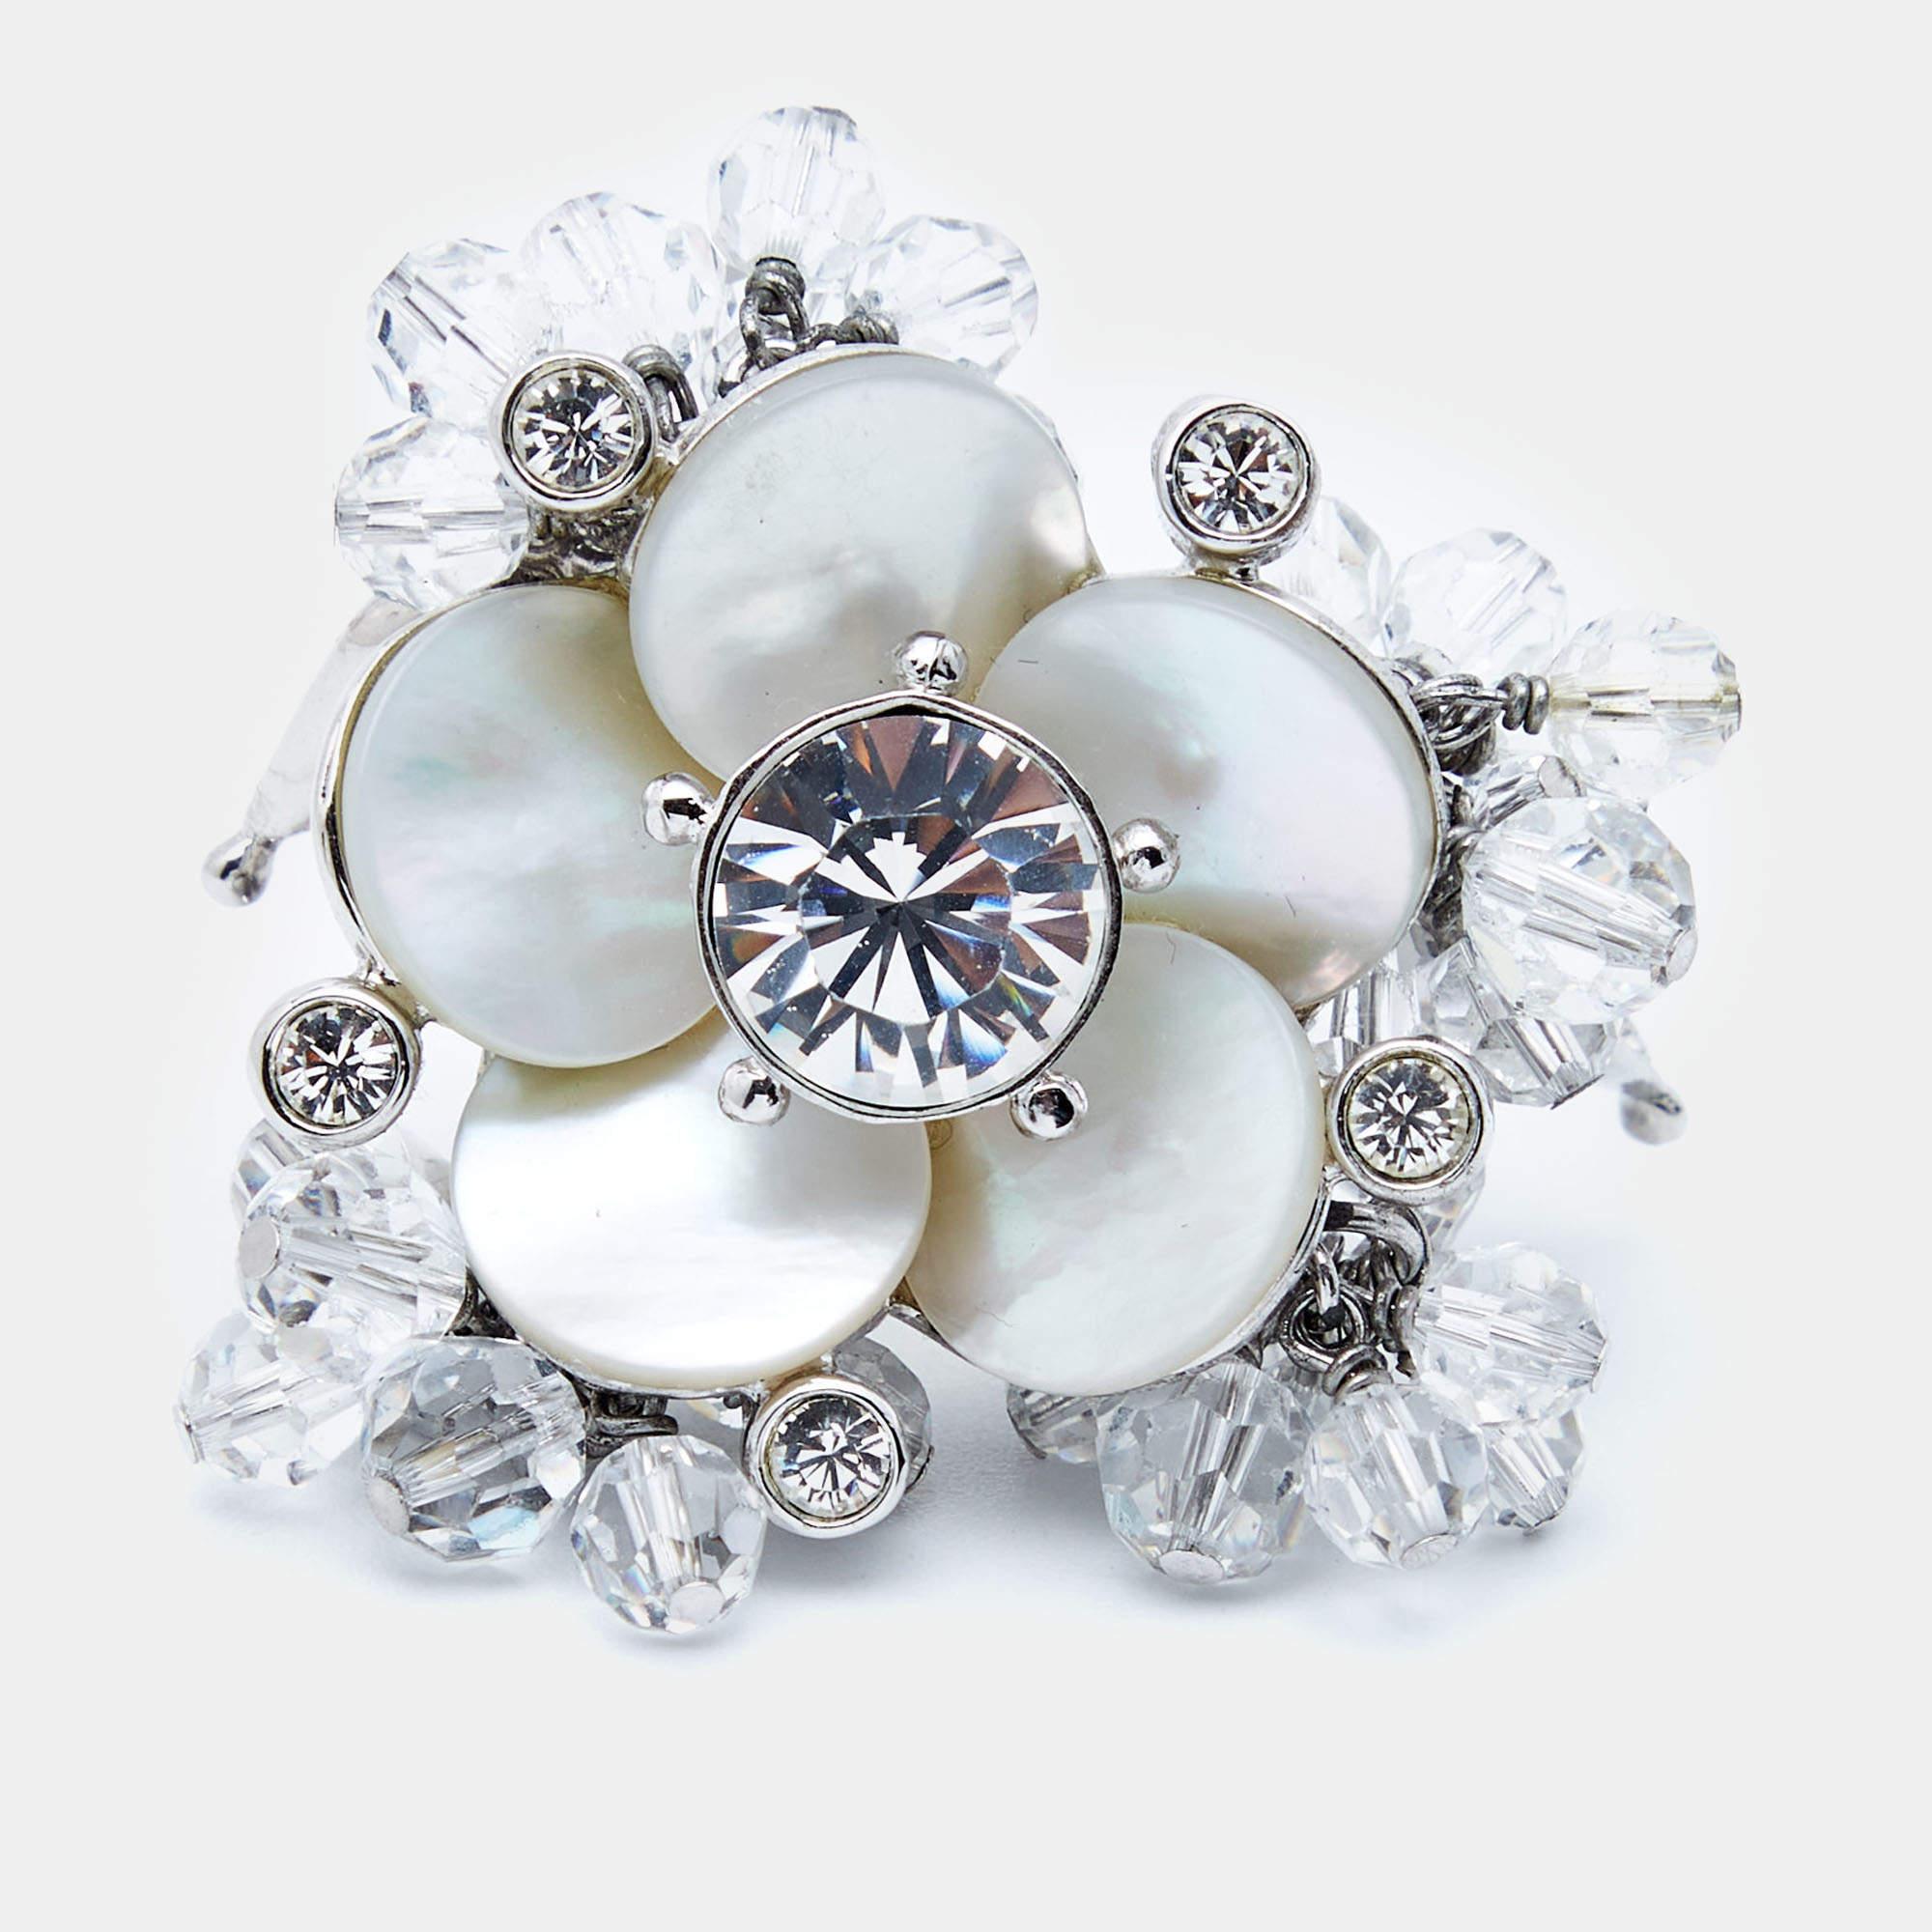 Well-crafted accessories are a sign of creativity and style. From Dior, this ring is designed to be flaunted. Crafted from silver-tone metal, this piece has an embellished, cutout band and a cluster of faux pearls and crystals surrounding a notable